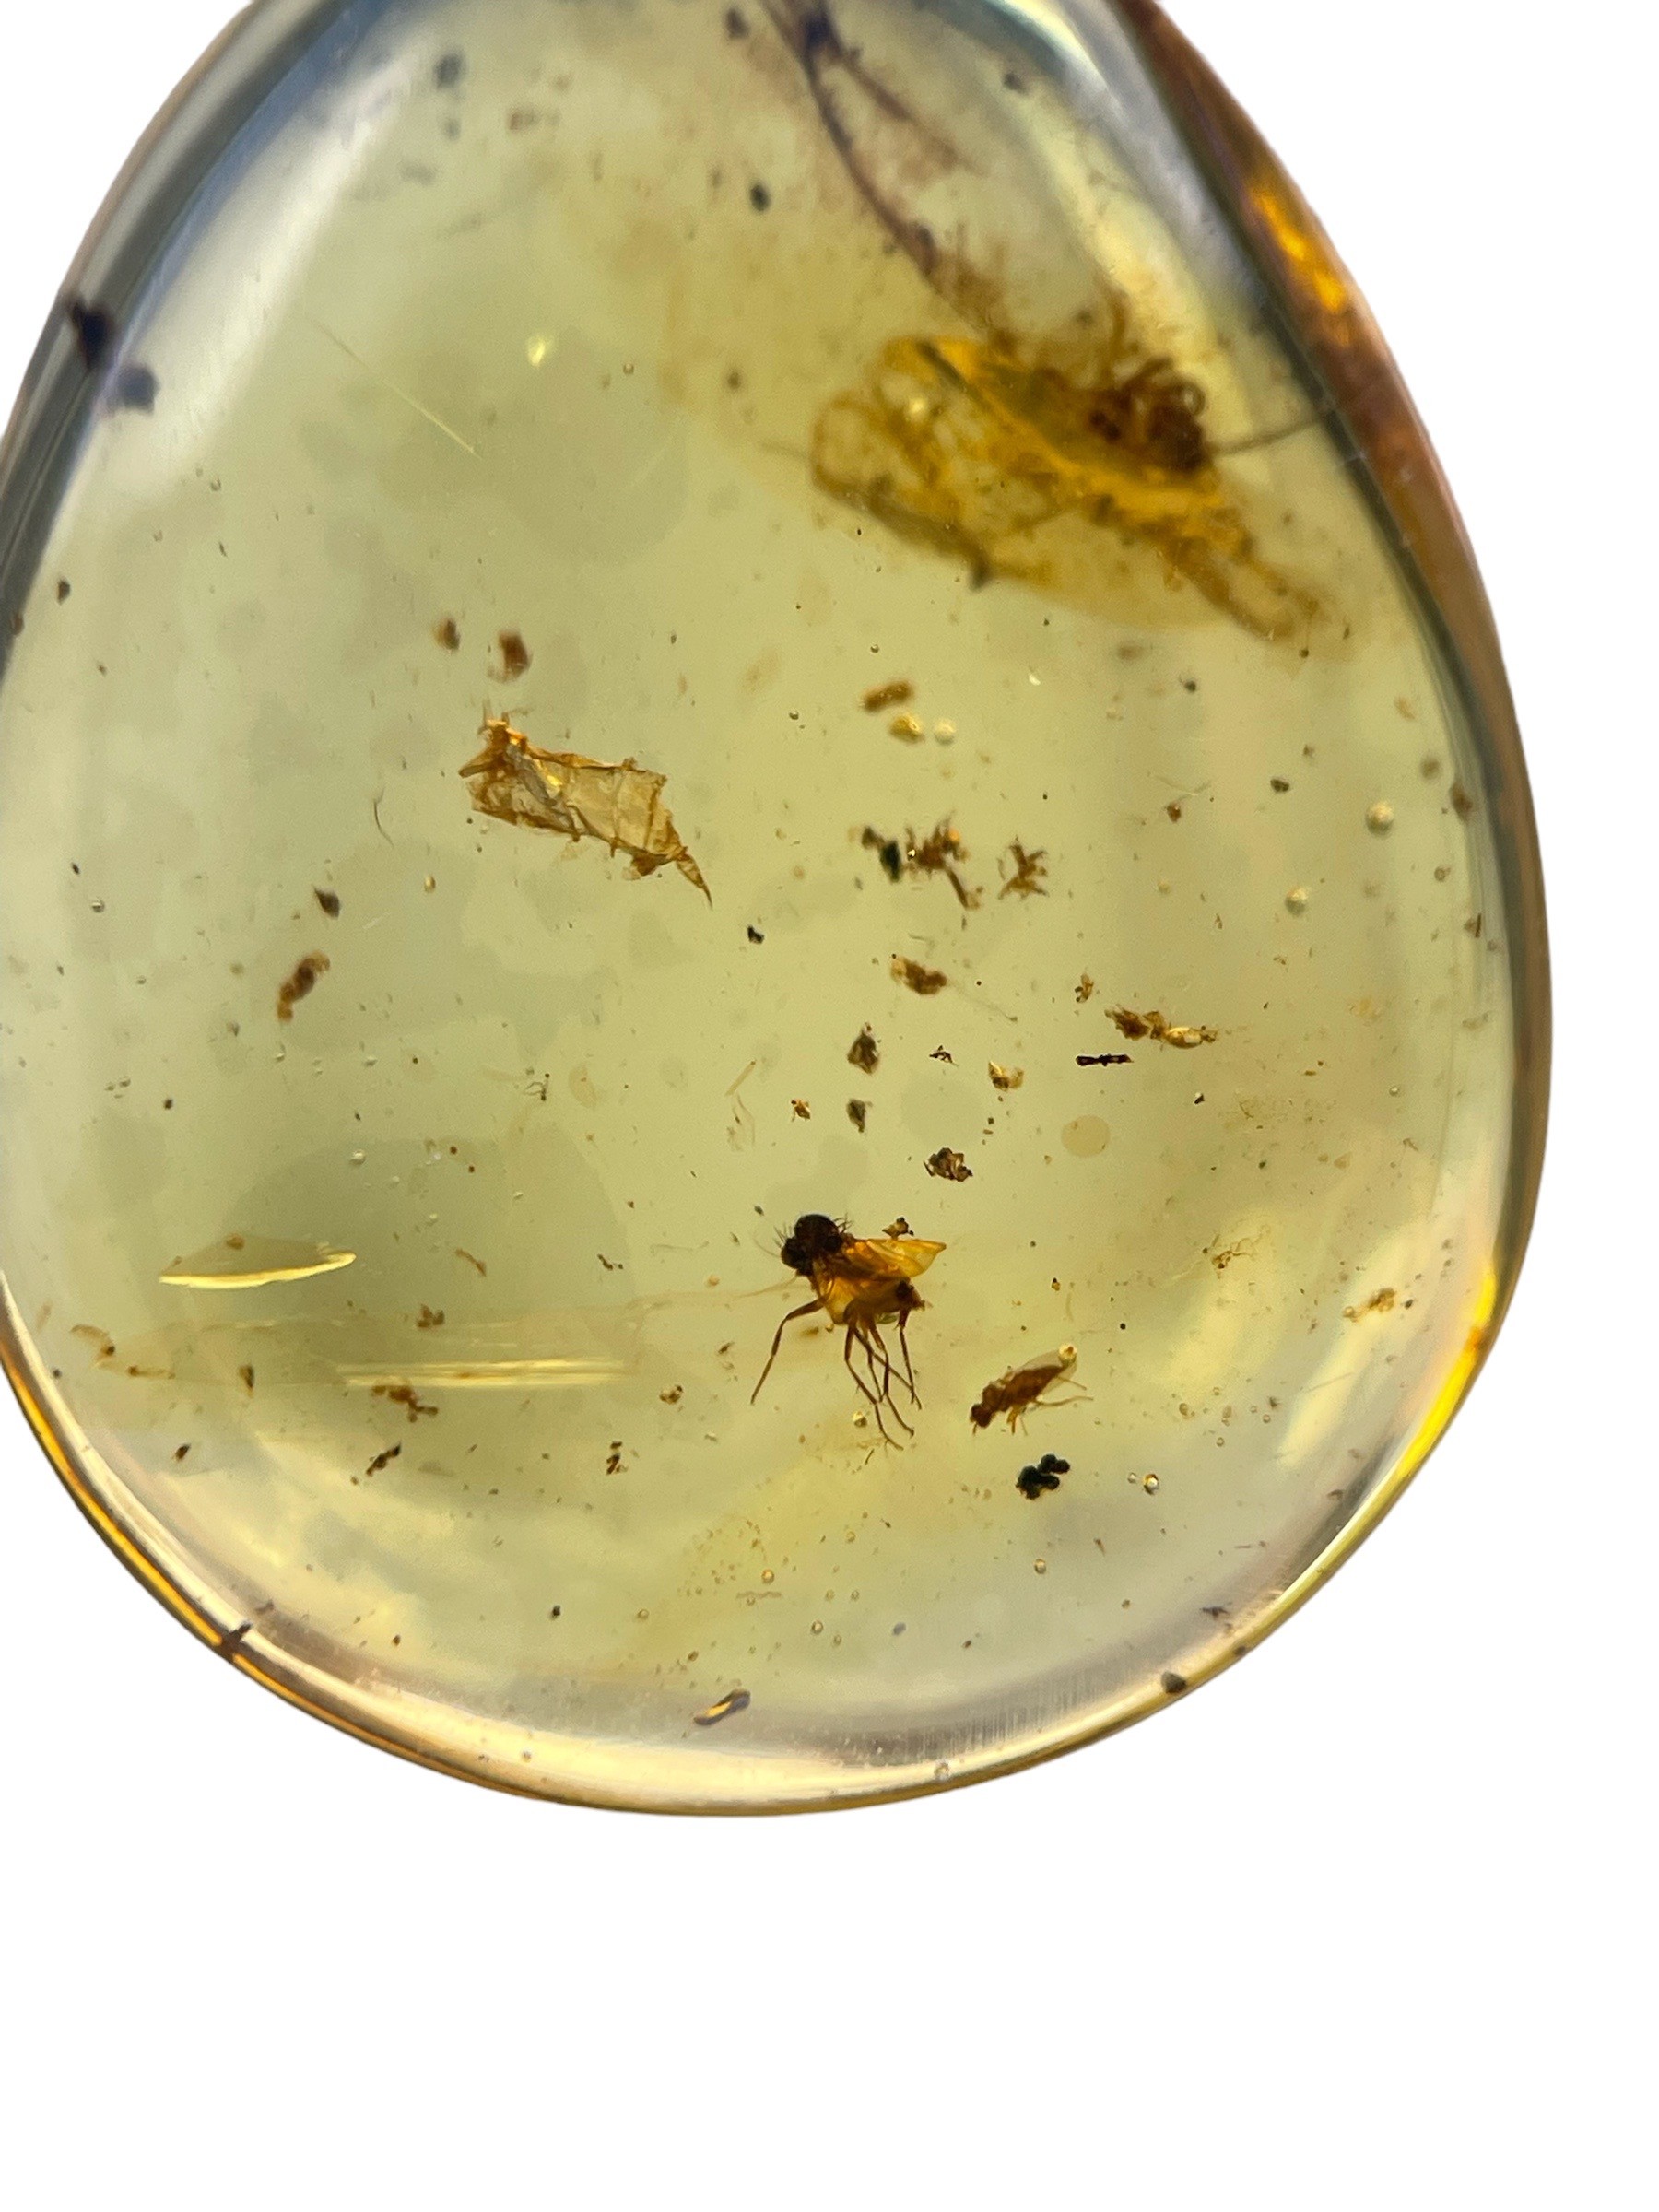 A FOSSIL FLY IN DINOSAUR AGED BURMESE AMBER A highly detailed fly, alongside others in clear - Image 3 of 3